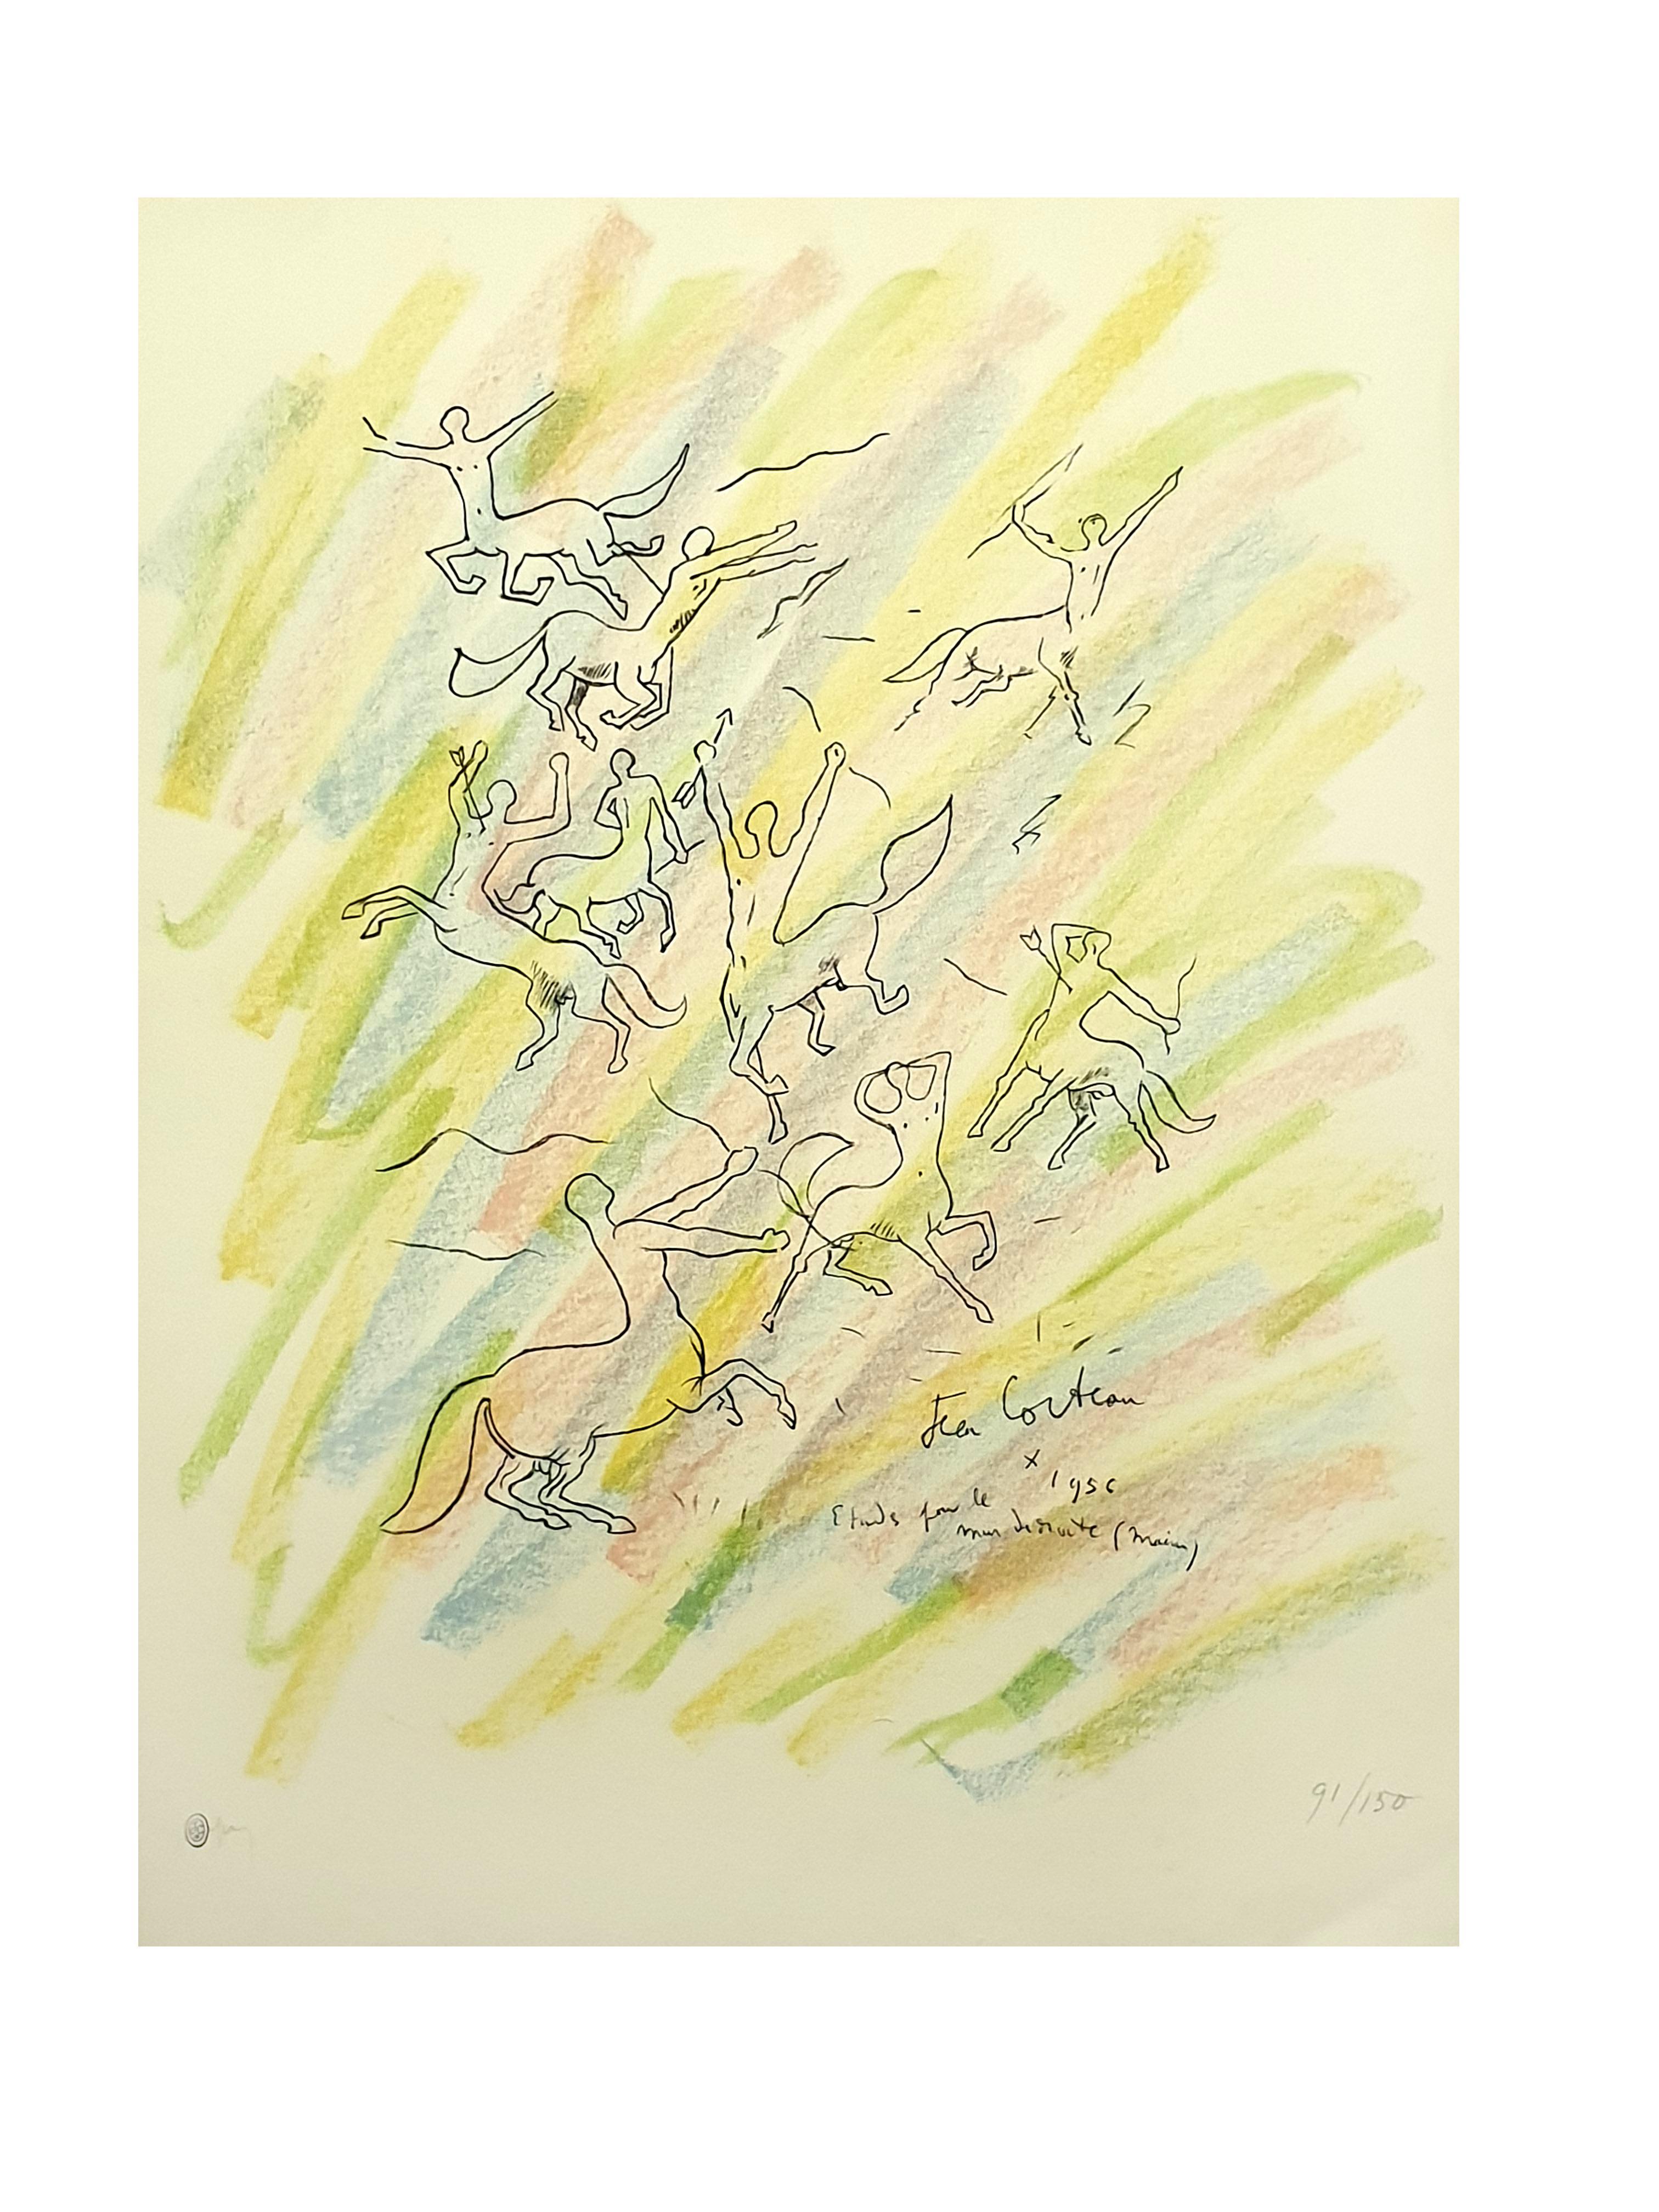 Jean Cocteau - Study for the Wall - Original Handsigned Lithograph For Sale 2